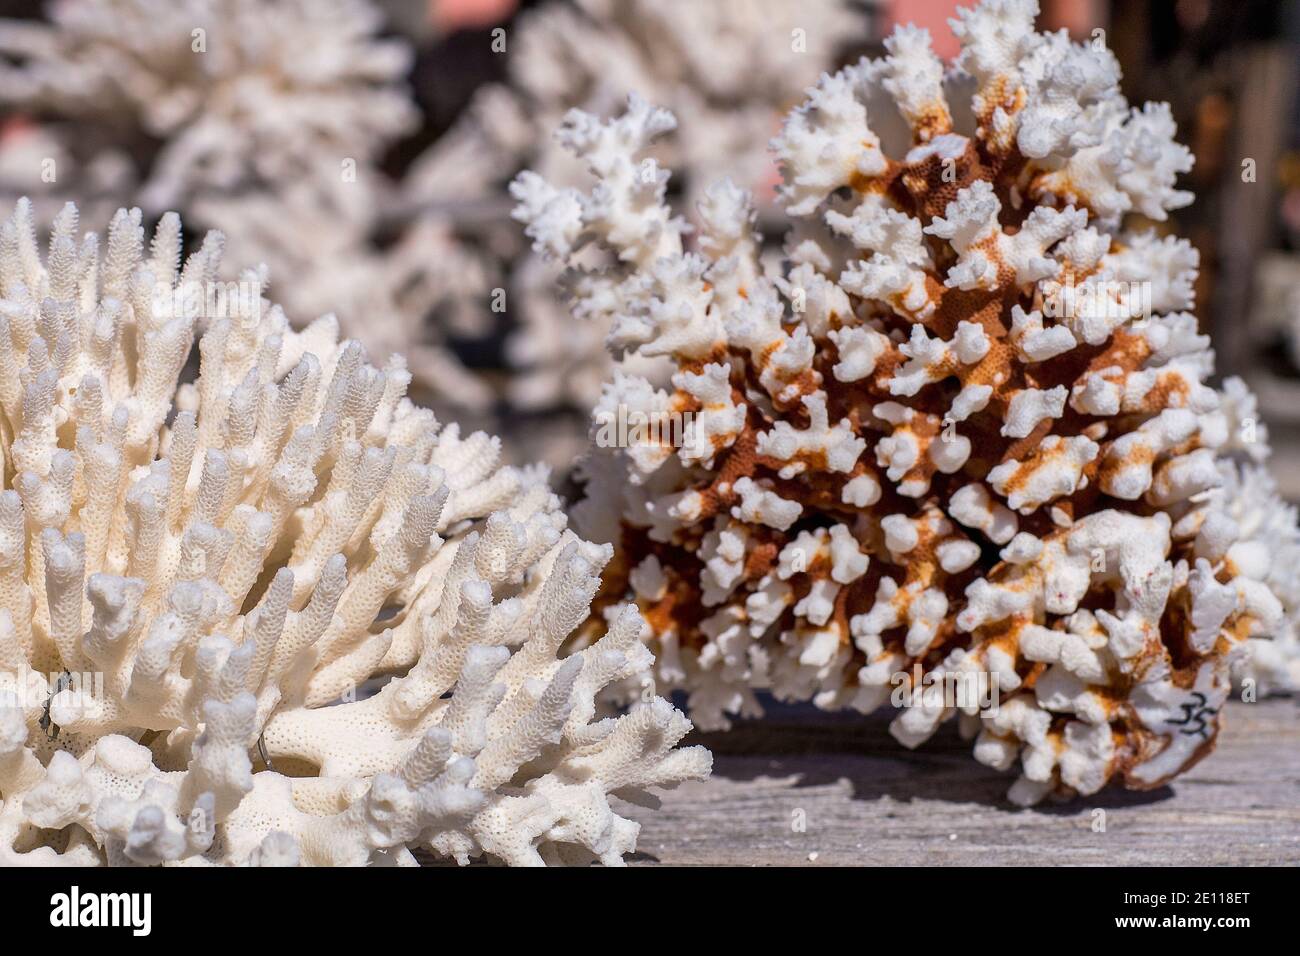 Dried coral outside a shop on Key Largo in the Florida Keys. Stock Photo